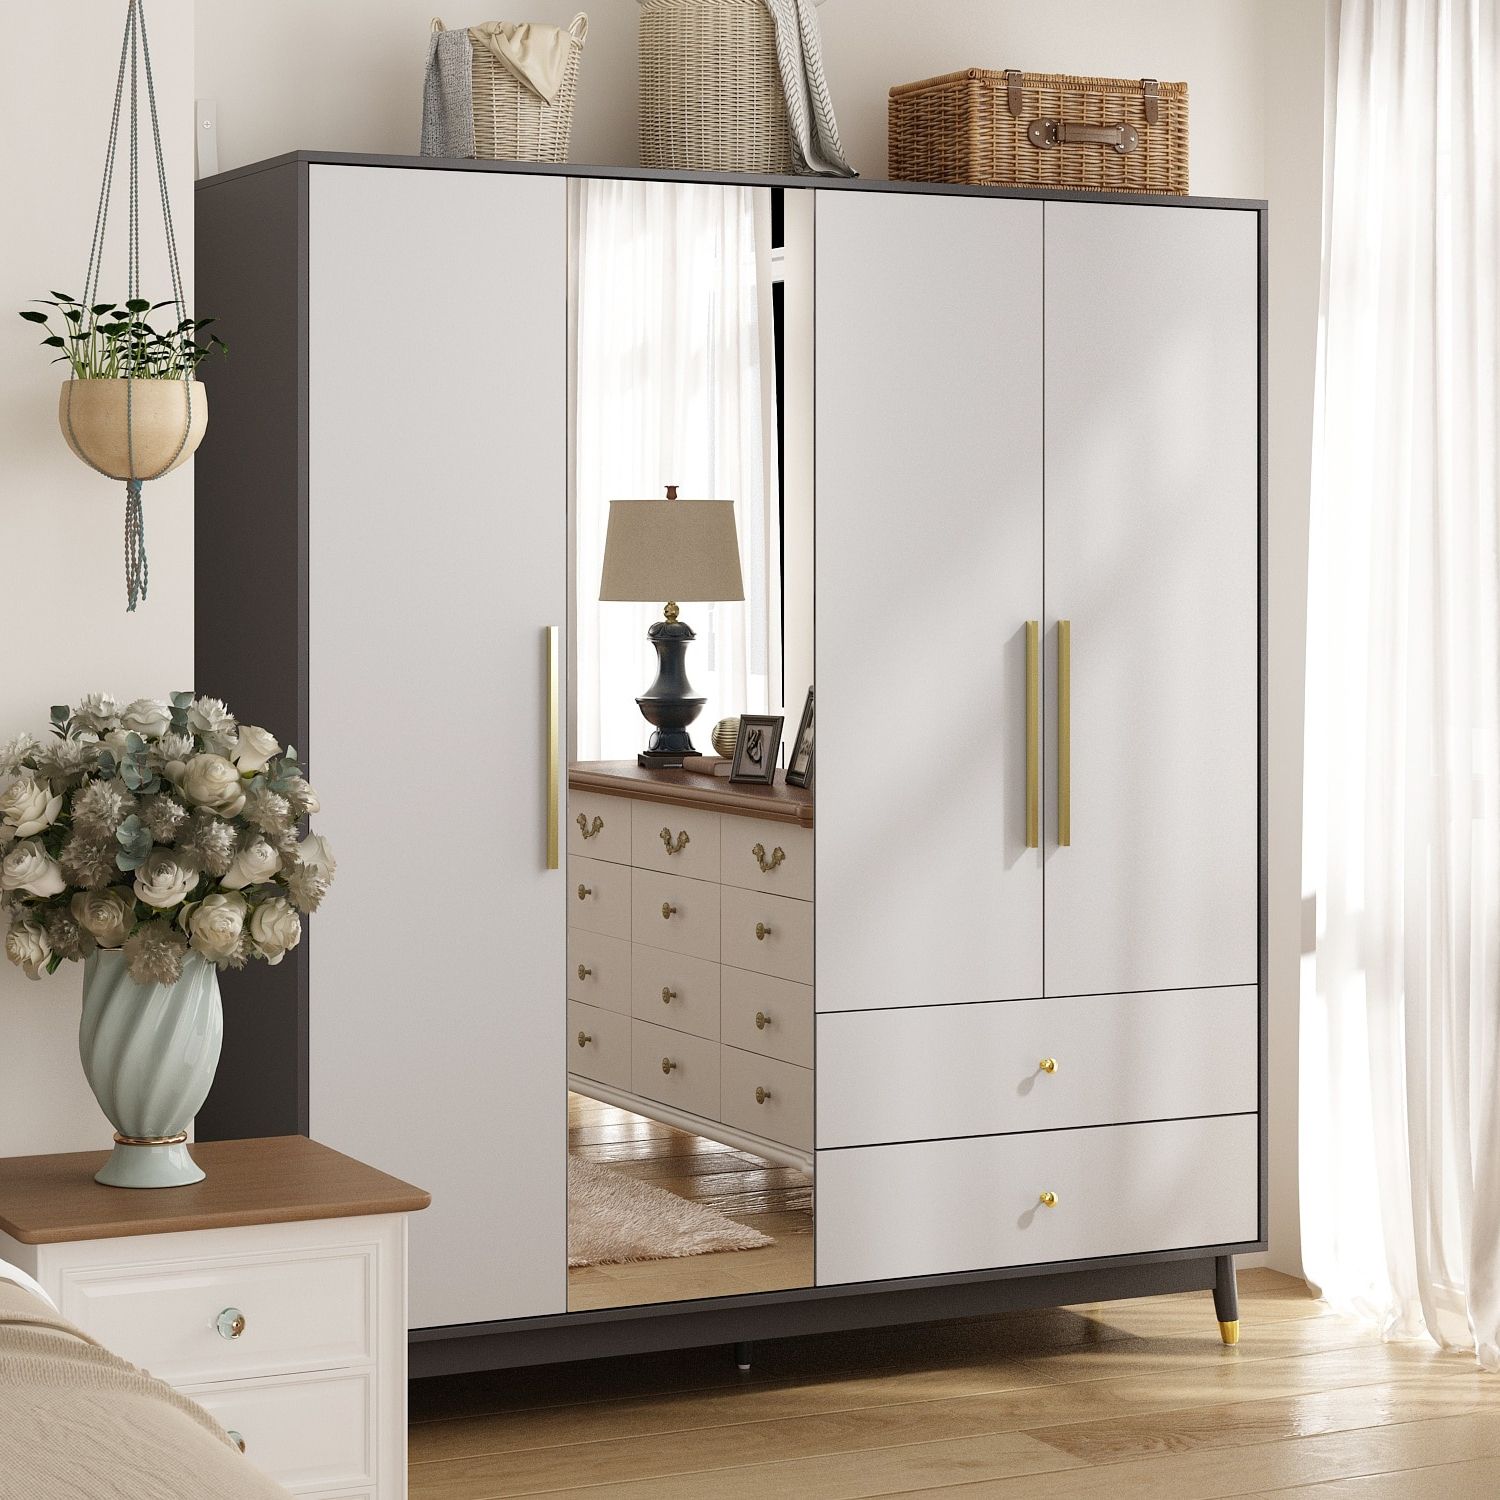 Wardrobe Armoire Closet With Mirror Wardrobe Cabinet With 2 Drawers – Bed  Bath & Beyond – 37684302 With Regard To Mirrored Wardrobes With Drawers (View 3 of 20)